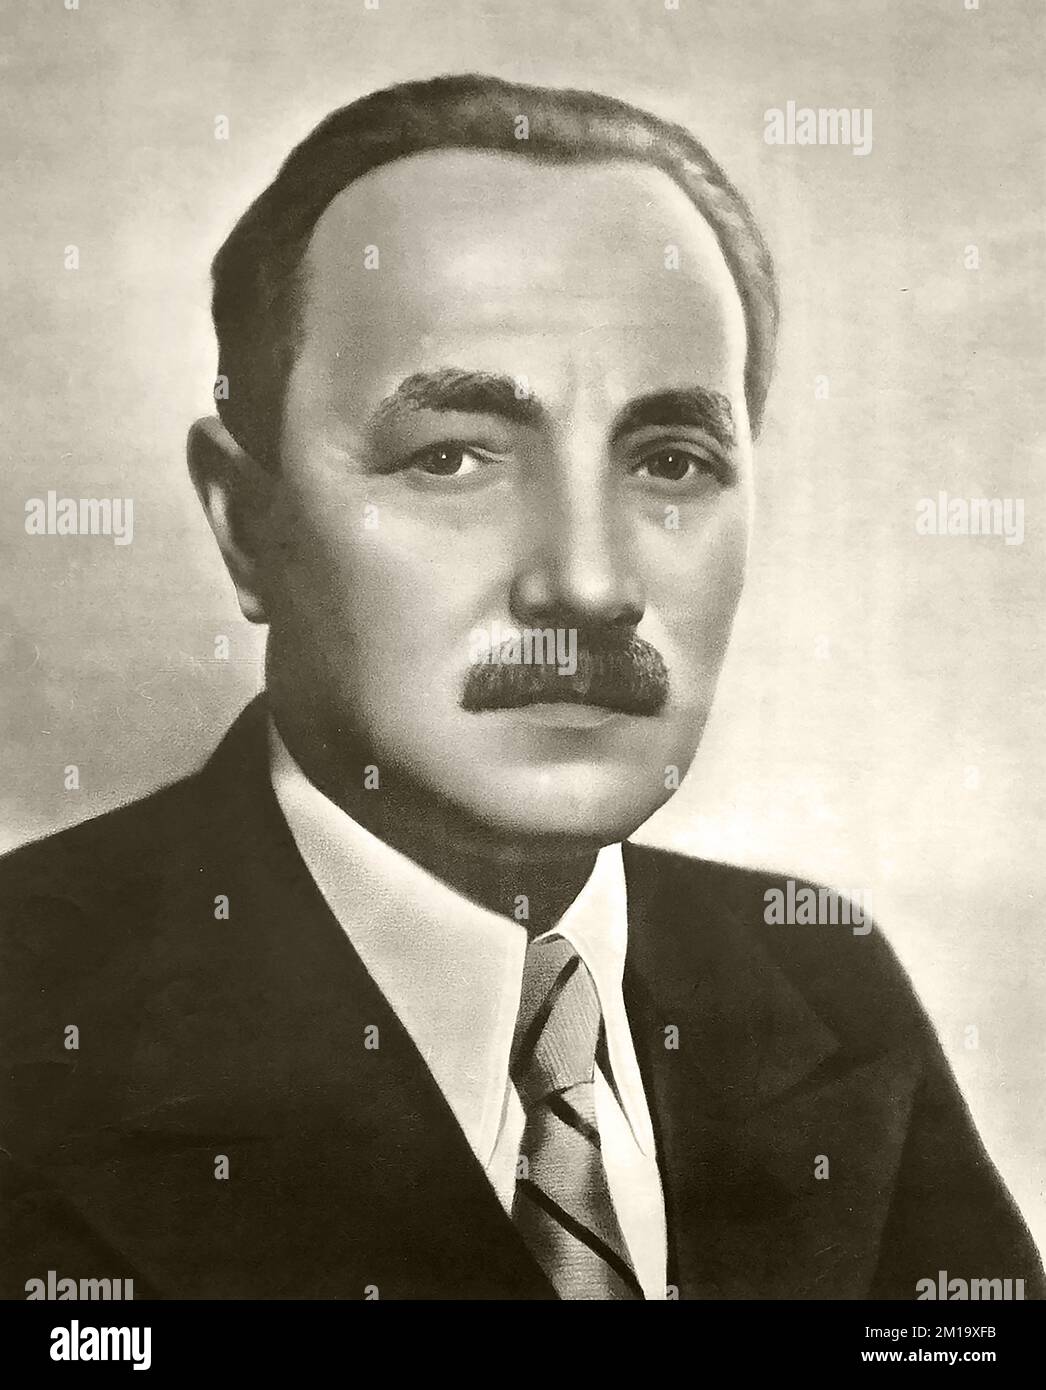 Portrait of Boleslaw Bierut. He was a Polish communist activist and politician, leader of the Polish People's Republic from 1947 until 1956. He was President of the State National Council from 1944 to 1947, President of Poland from 1947 to 1952, General Secretary of the Central Committee of the Polish United Workers' Party from 1948 to 1956, and Prime Minister of Poland from 1952 to 1954. Bierut was a self-educated person. He implemented aspects of the Stalinist system in Poland. Stock Photo